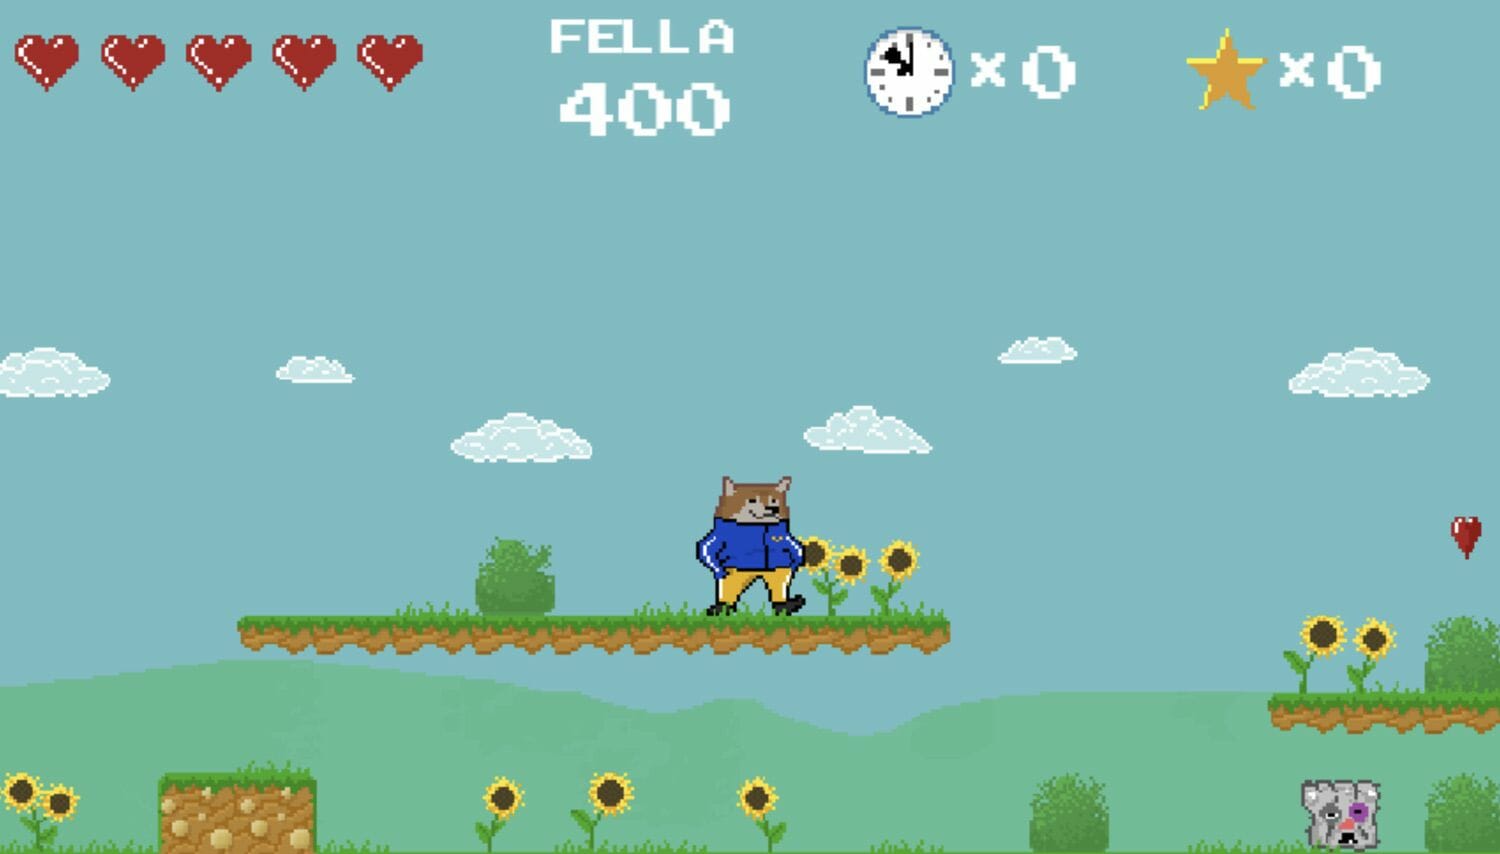 A Ukrainian developer is creating a game about NAFO - Fella Game